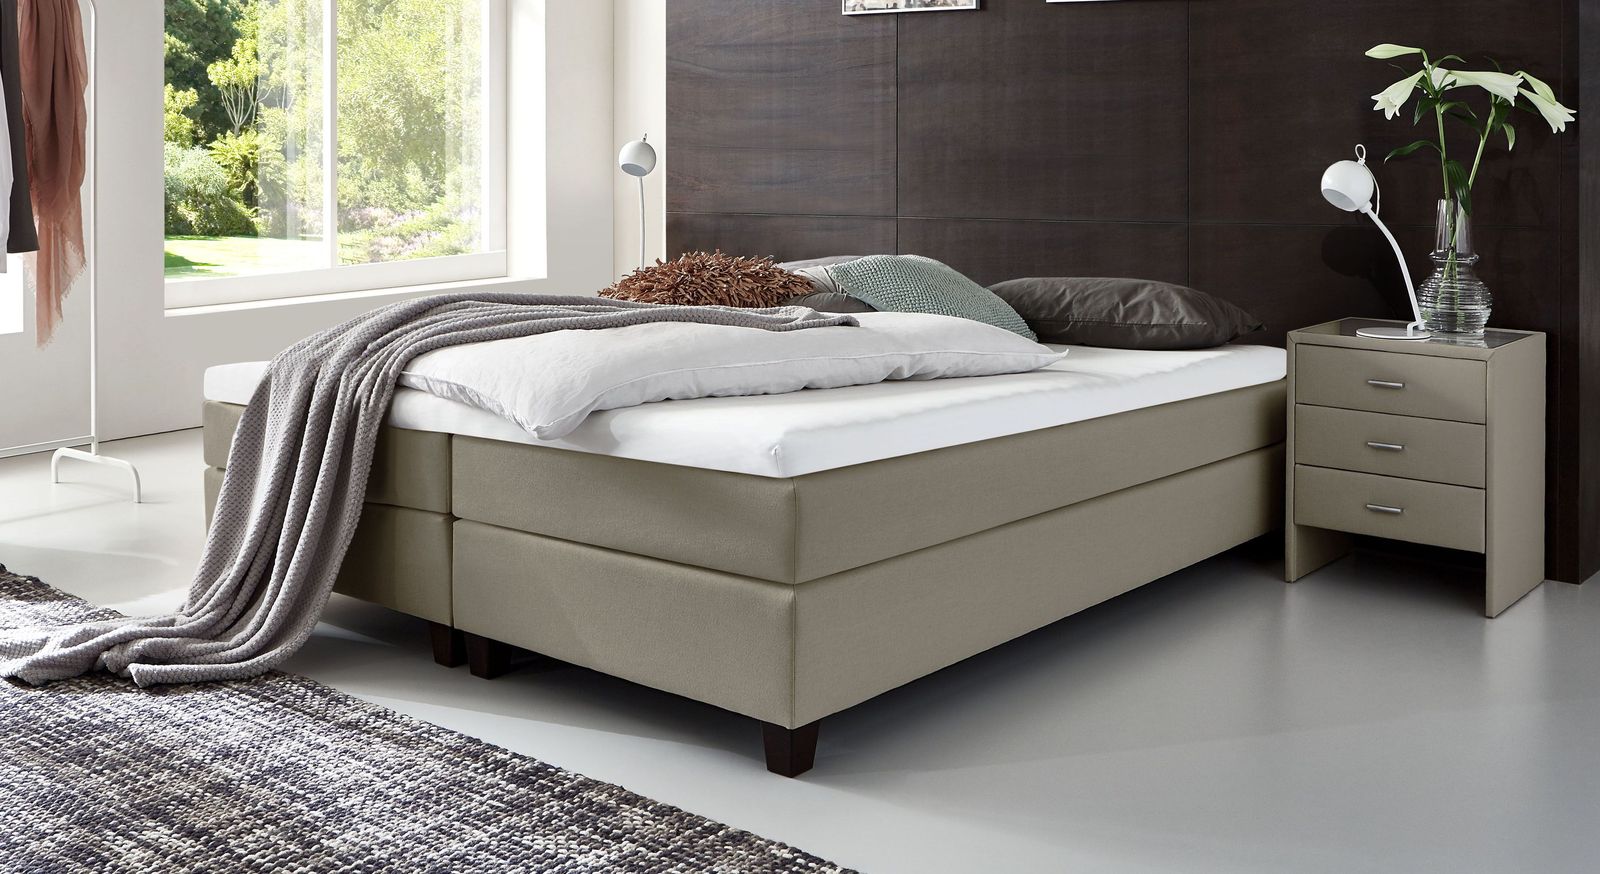 53 cm hohe Boxspringliege Luciano aus Webstoff in Taupe